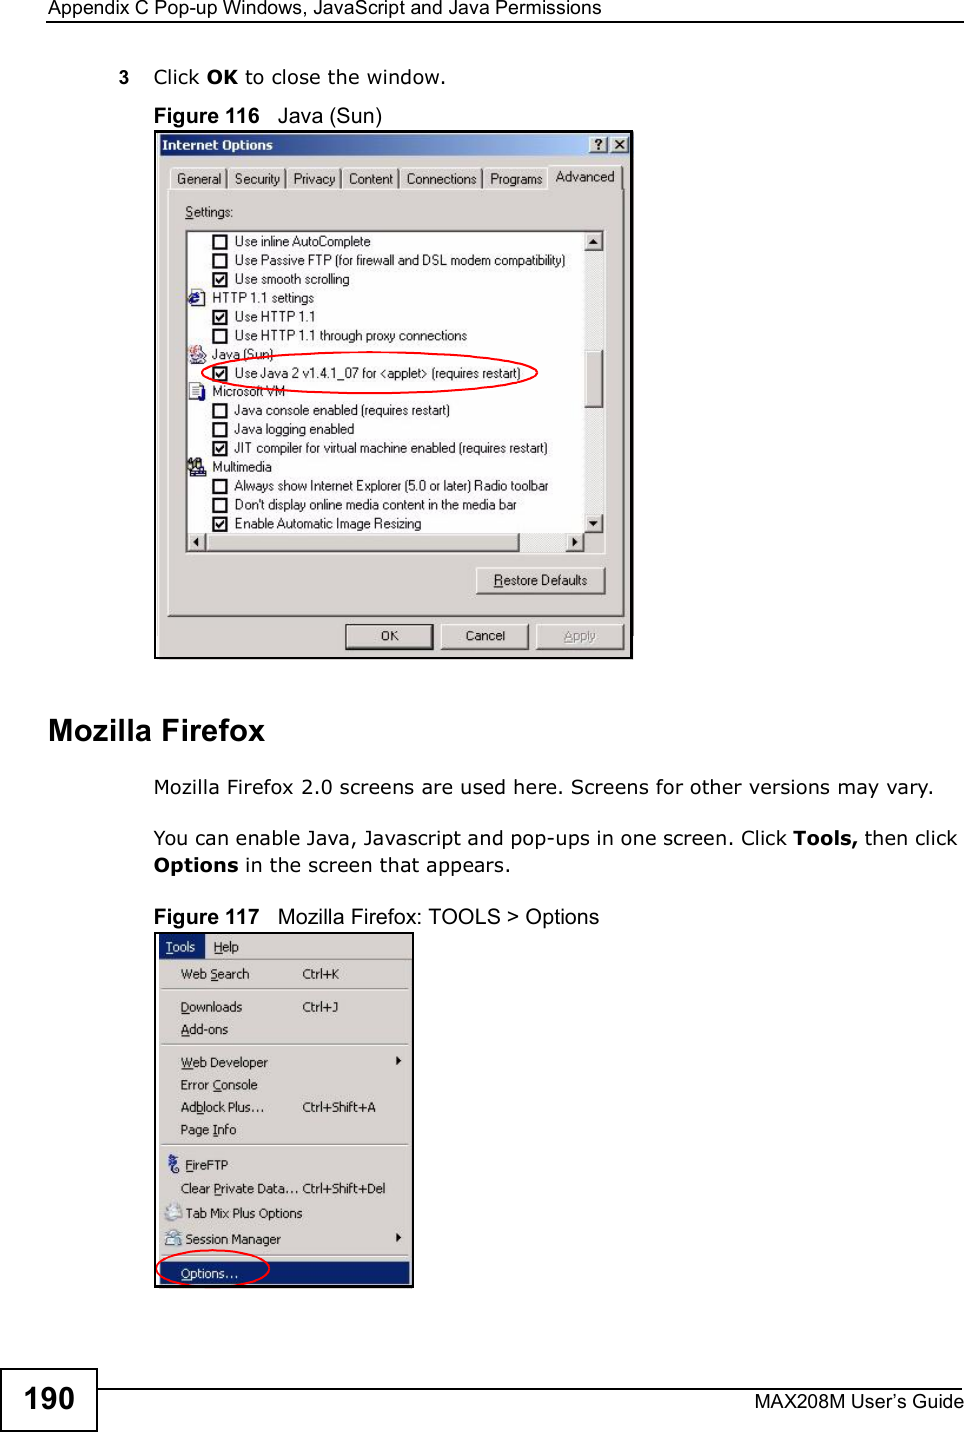 Appendix CPop-up Windows, JavaScript and Java PermissionsMAX208M User s Guide1903Click OK to close the window.Figure 116   Java (Sun)Mozilla FirefoxMozilla Firefox 2.0 screens are used here. Screens for other versions may vary. You can enable Java, Javascript and pop-ups in one screen. Click Tools, then click Options in the screen that appears.Figure 117   Mozilla Firefox: TOOLS &gt; Options